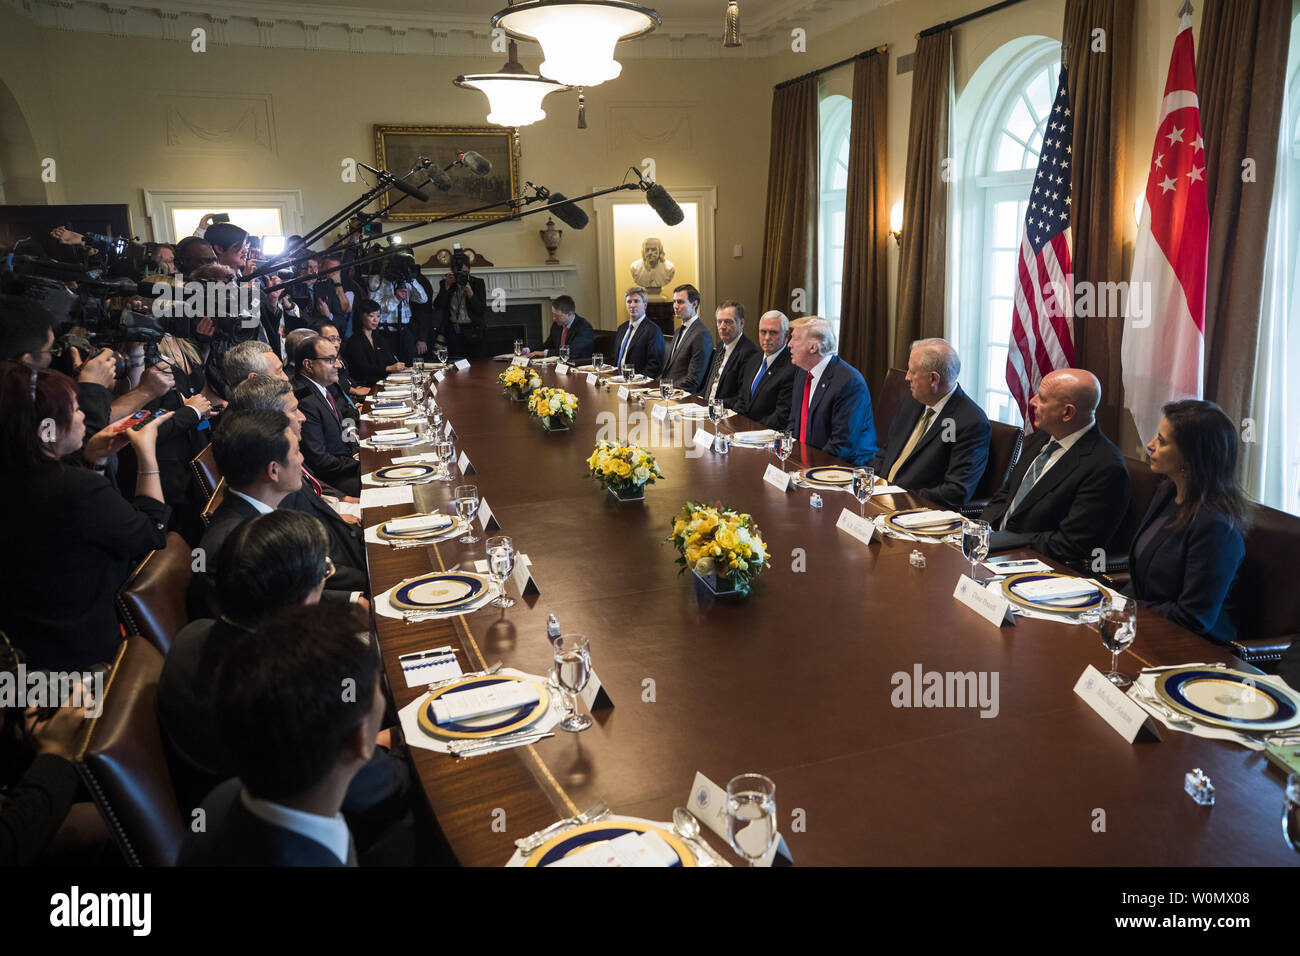 US President Donald Trump (C) welcomes Prime Minister Lee Hsien Loong (left) of Singapore to the Cabinet Room before a working lunch between the two at the White House in Washington, DC, on October 23, 2017. The meeting comes less than two weeks before President Trump makes an extended trip to the Asia-Pacific region. Photo by Jim Louis Scalzo/UPI Stock Photo